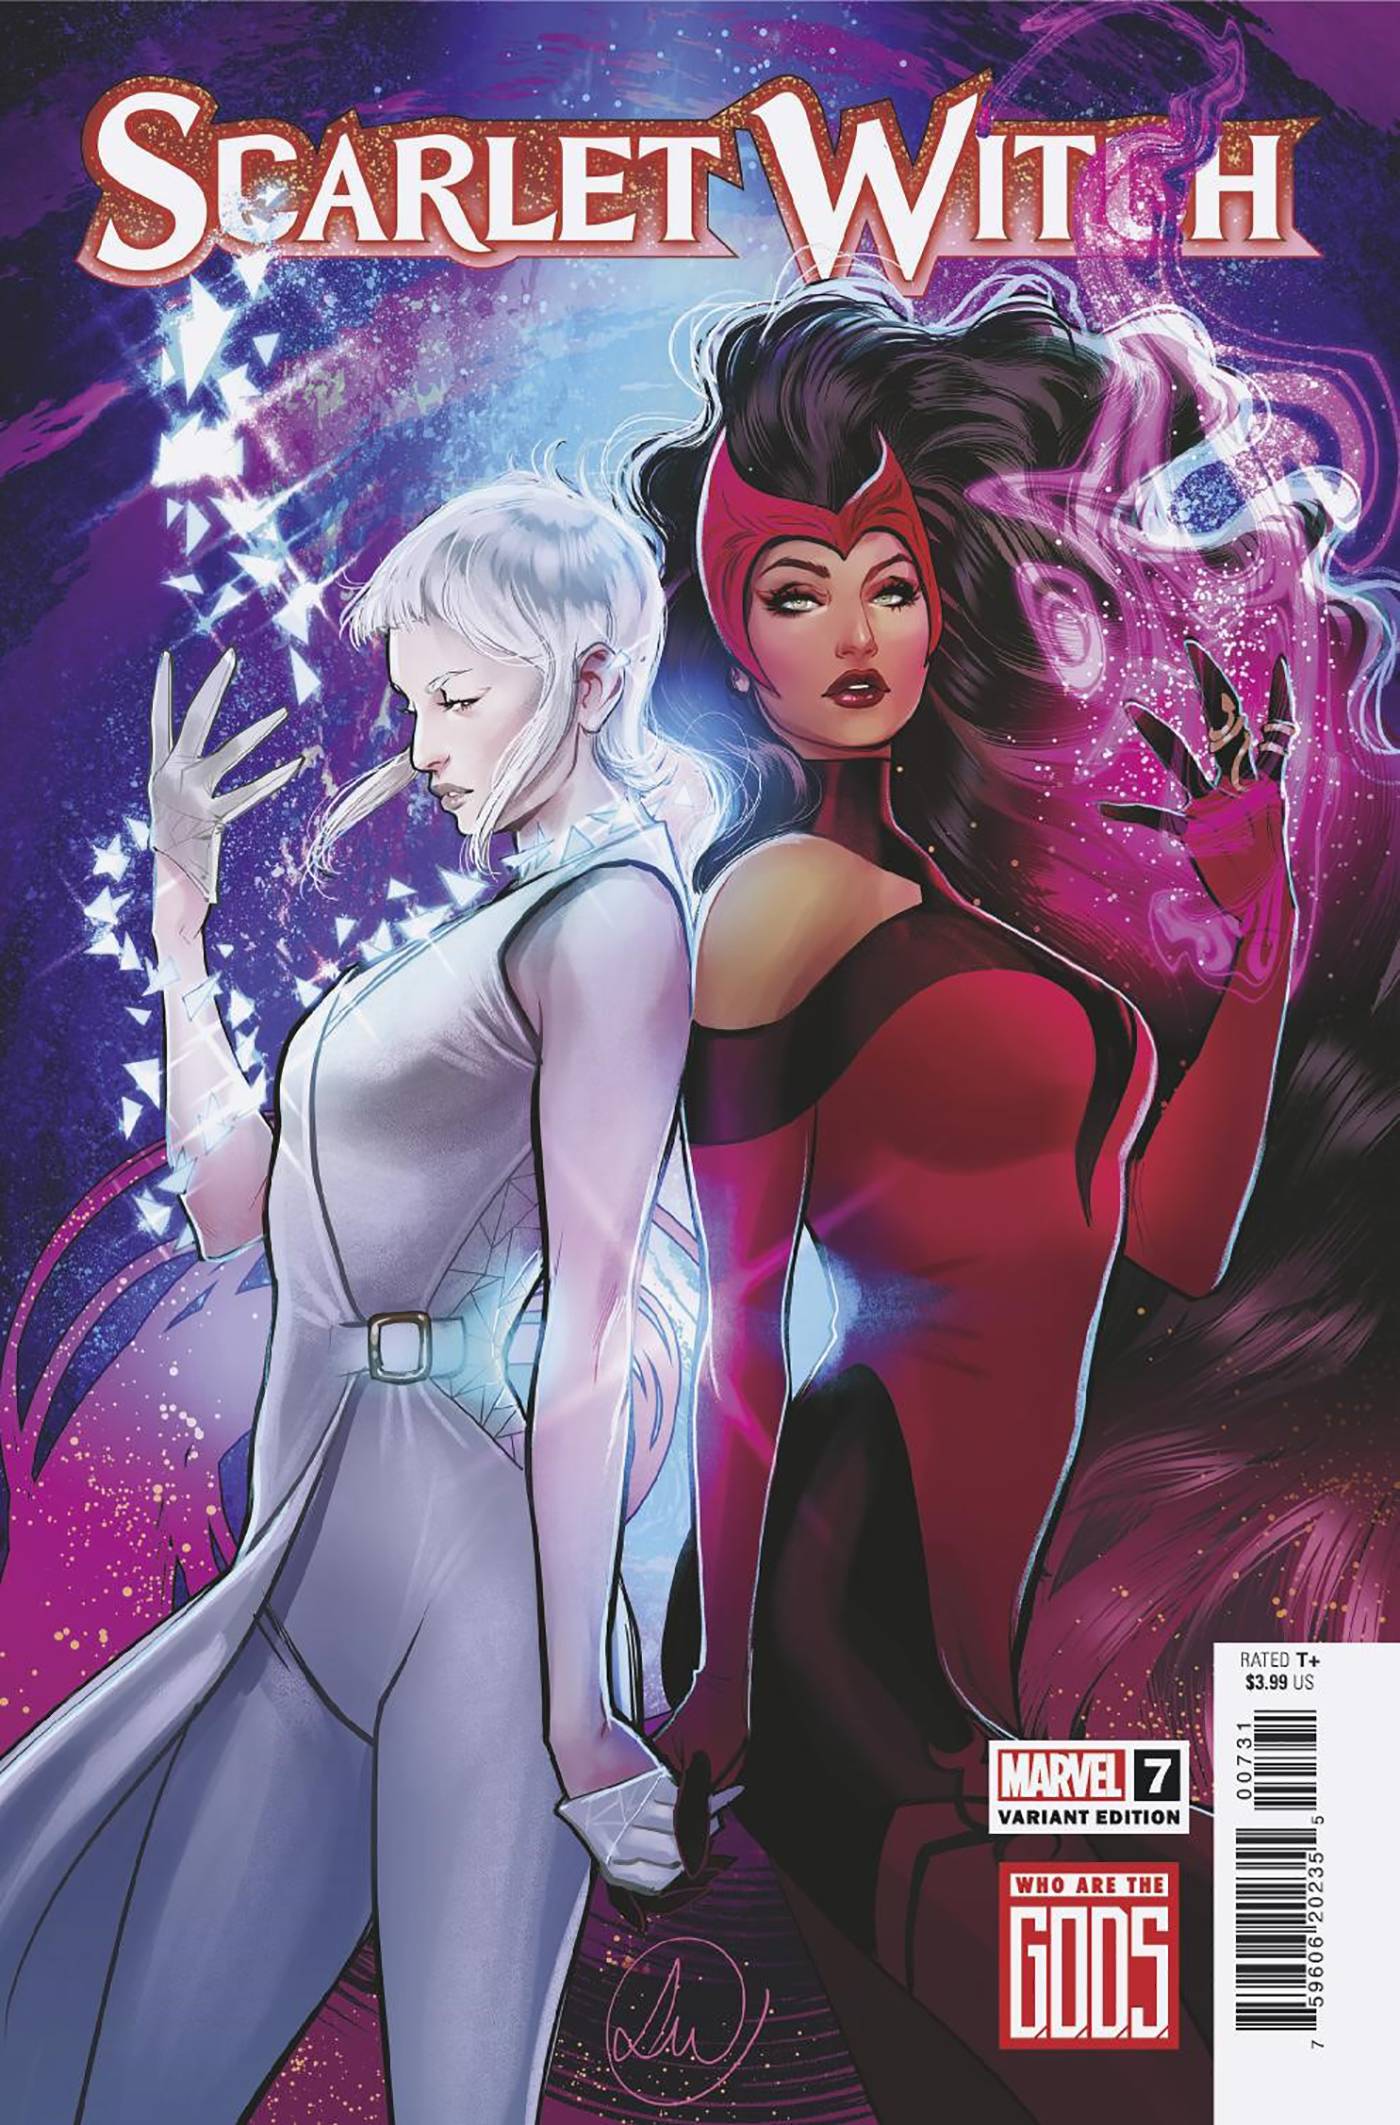 Scarlet Witch #8 Preview - The Comic Book Dispatch